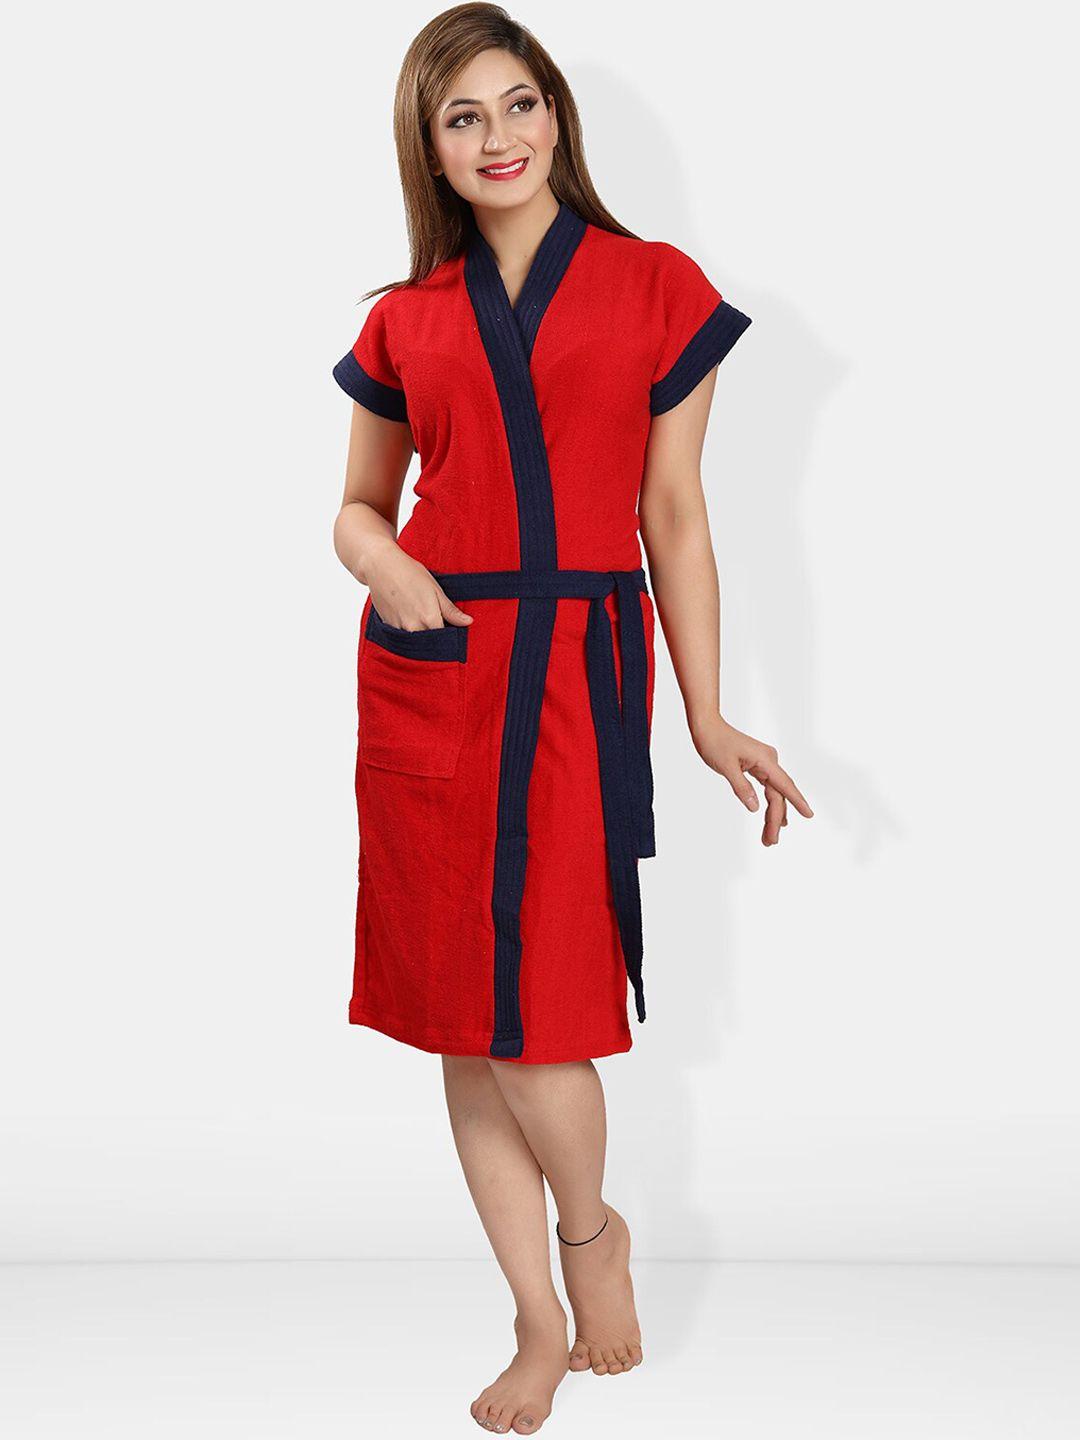 be you women cotton anti-bacterial super soft bath robe with belt